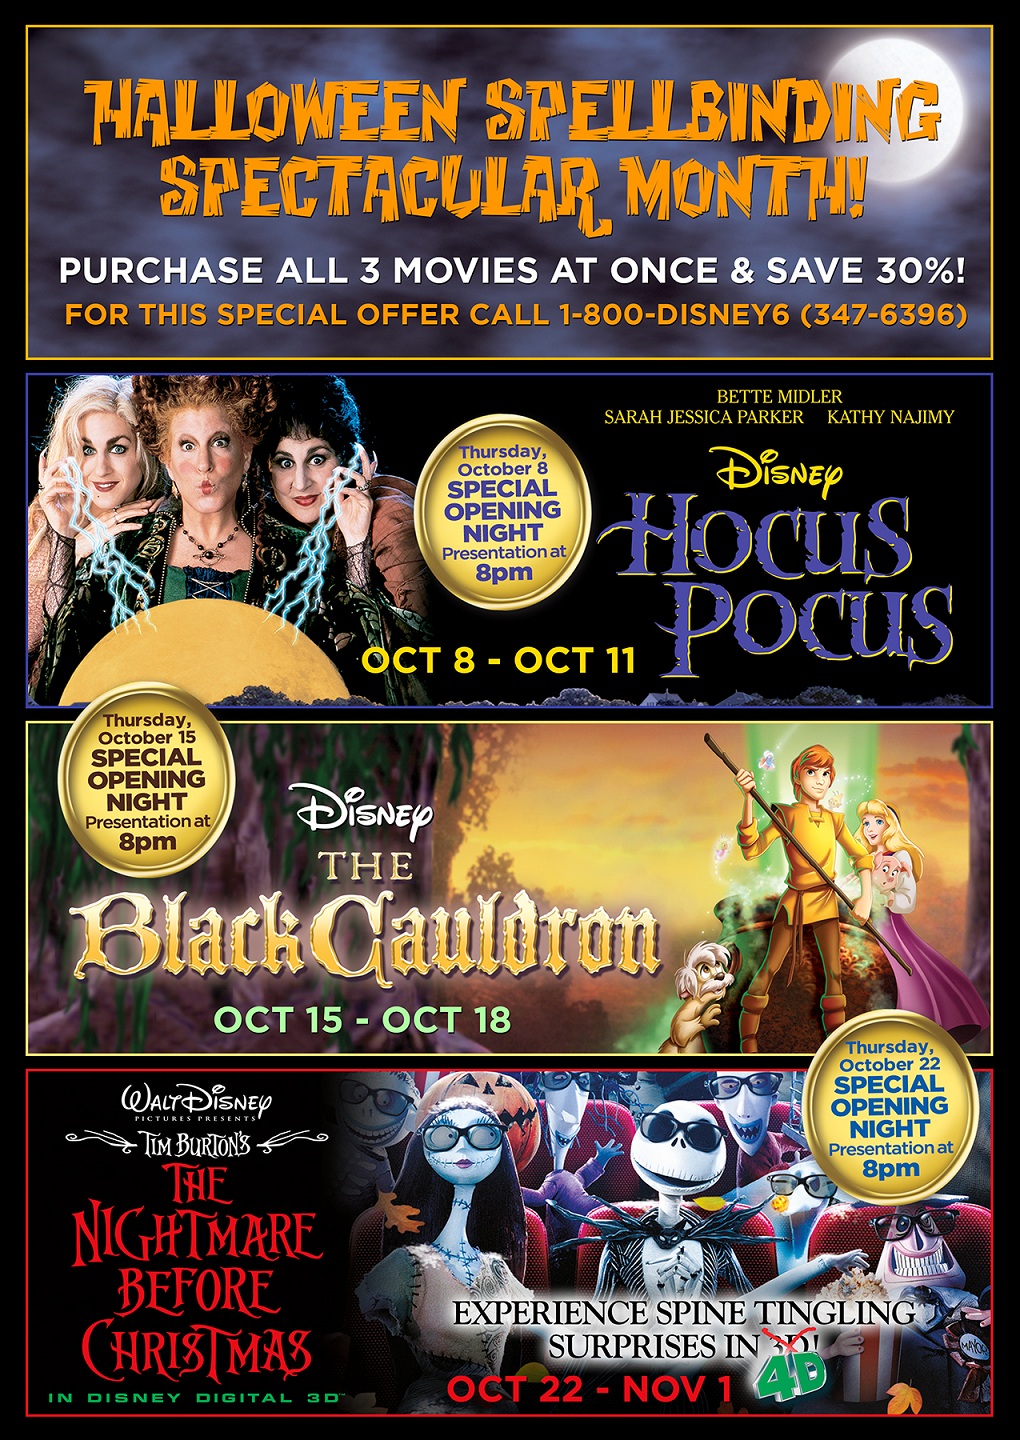 ‘Hocus Pocus,’ ‘The Black Cauldron’ & ‘The Nightmare Before Christmas’ Set to Play in the Month of October at the El Capitan Theatre